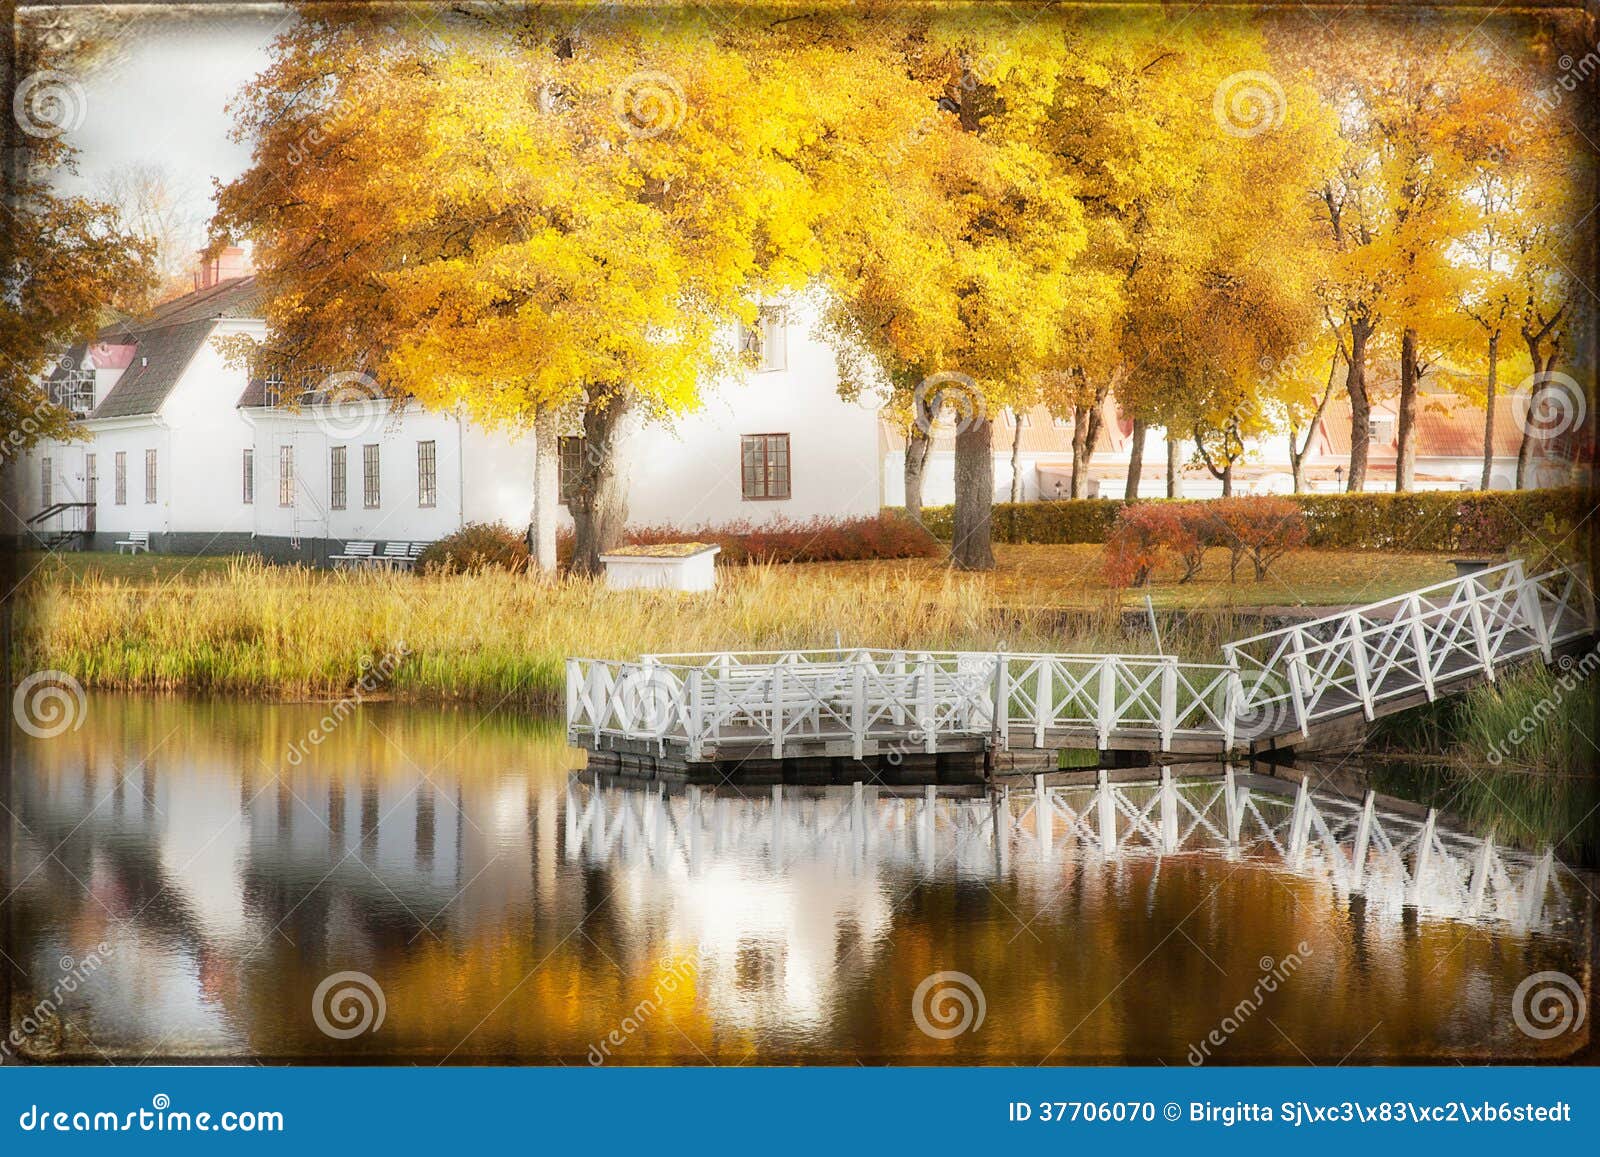 Fall in the park. stock photo. Image of lake, architecture - 37706070